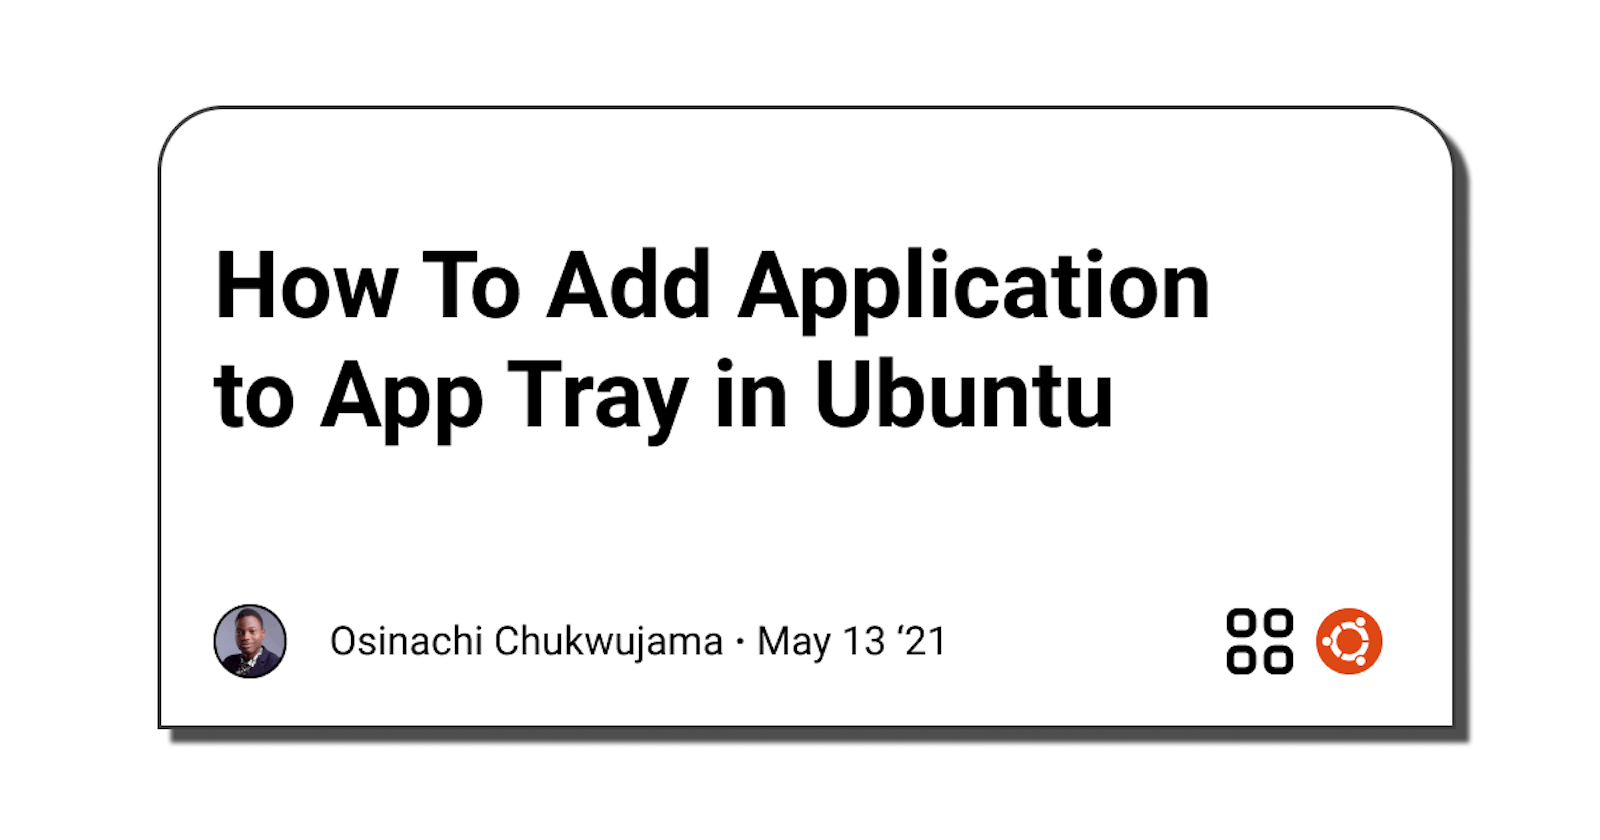 How To Add Application to App Tray in Ubuntu